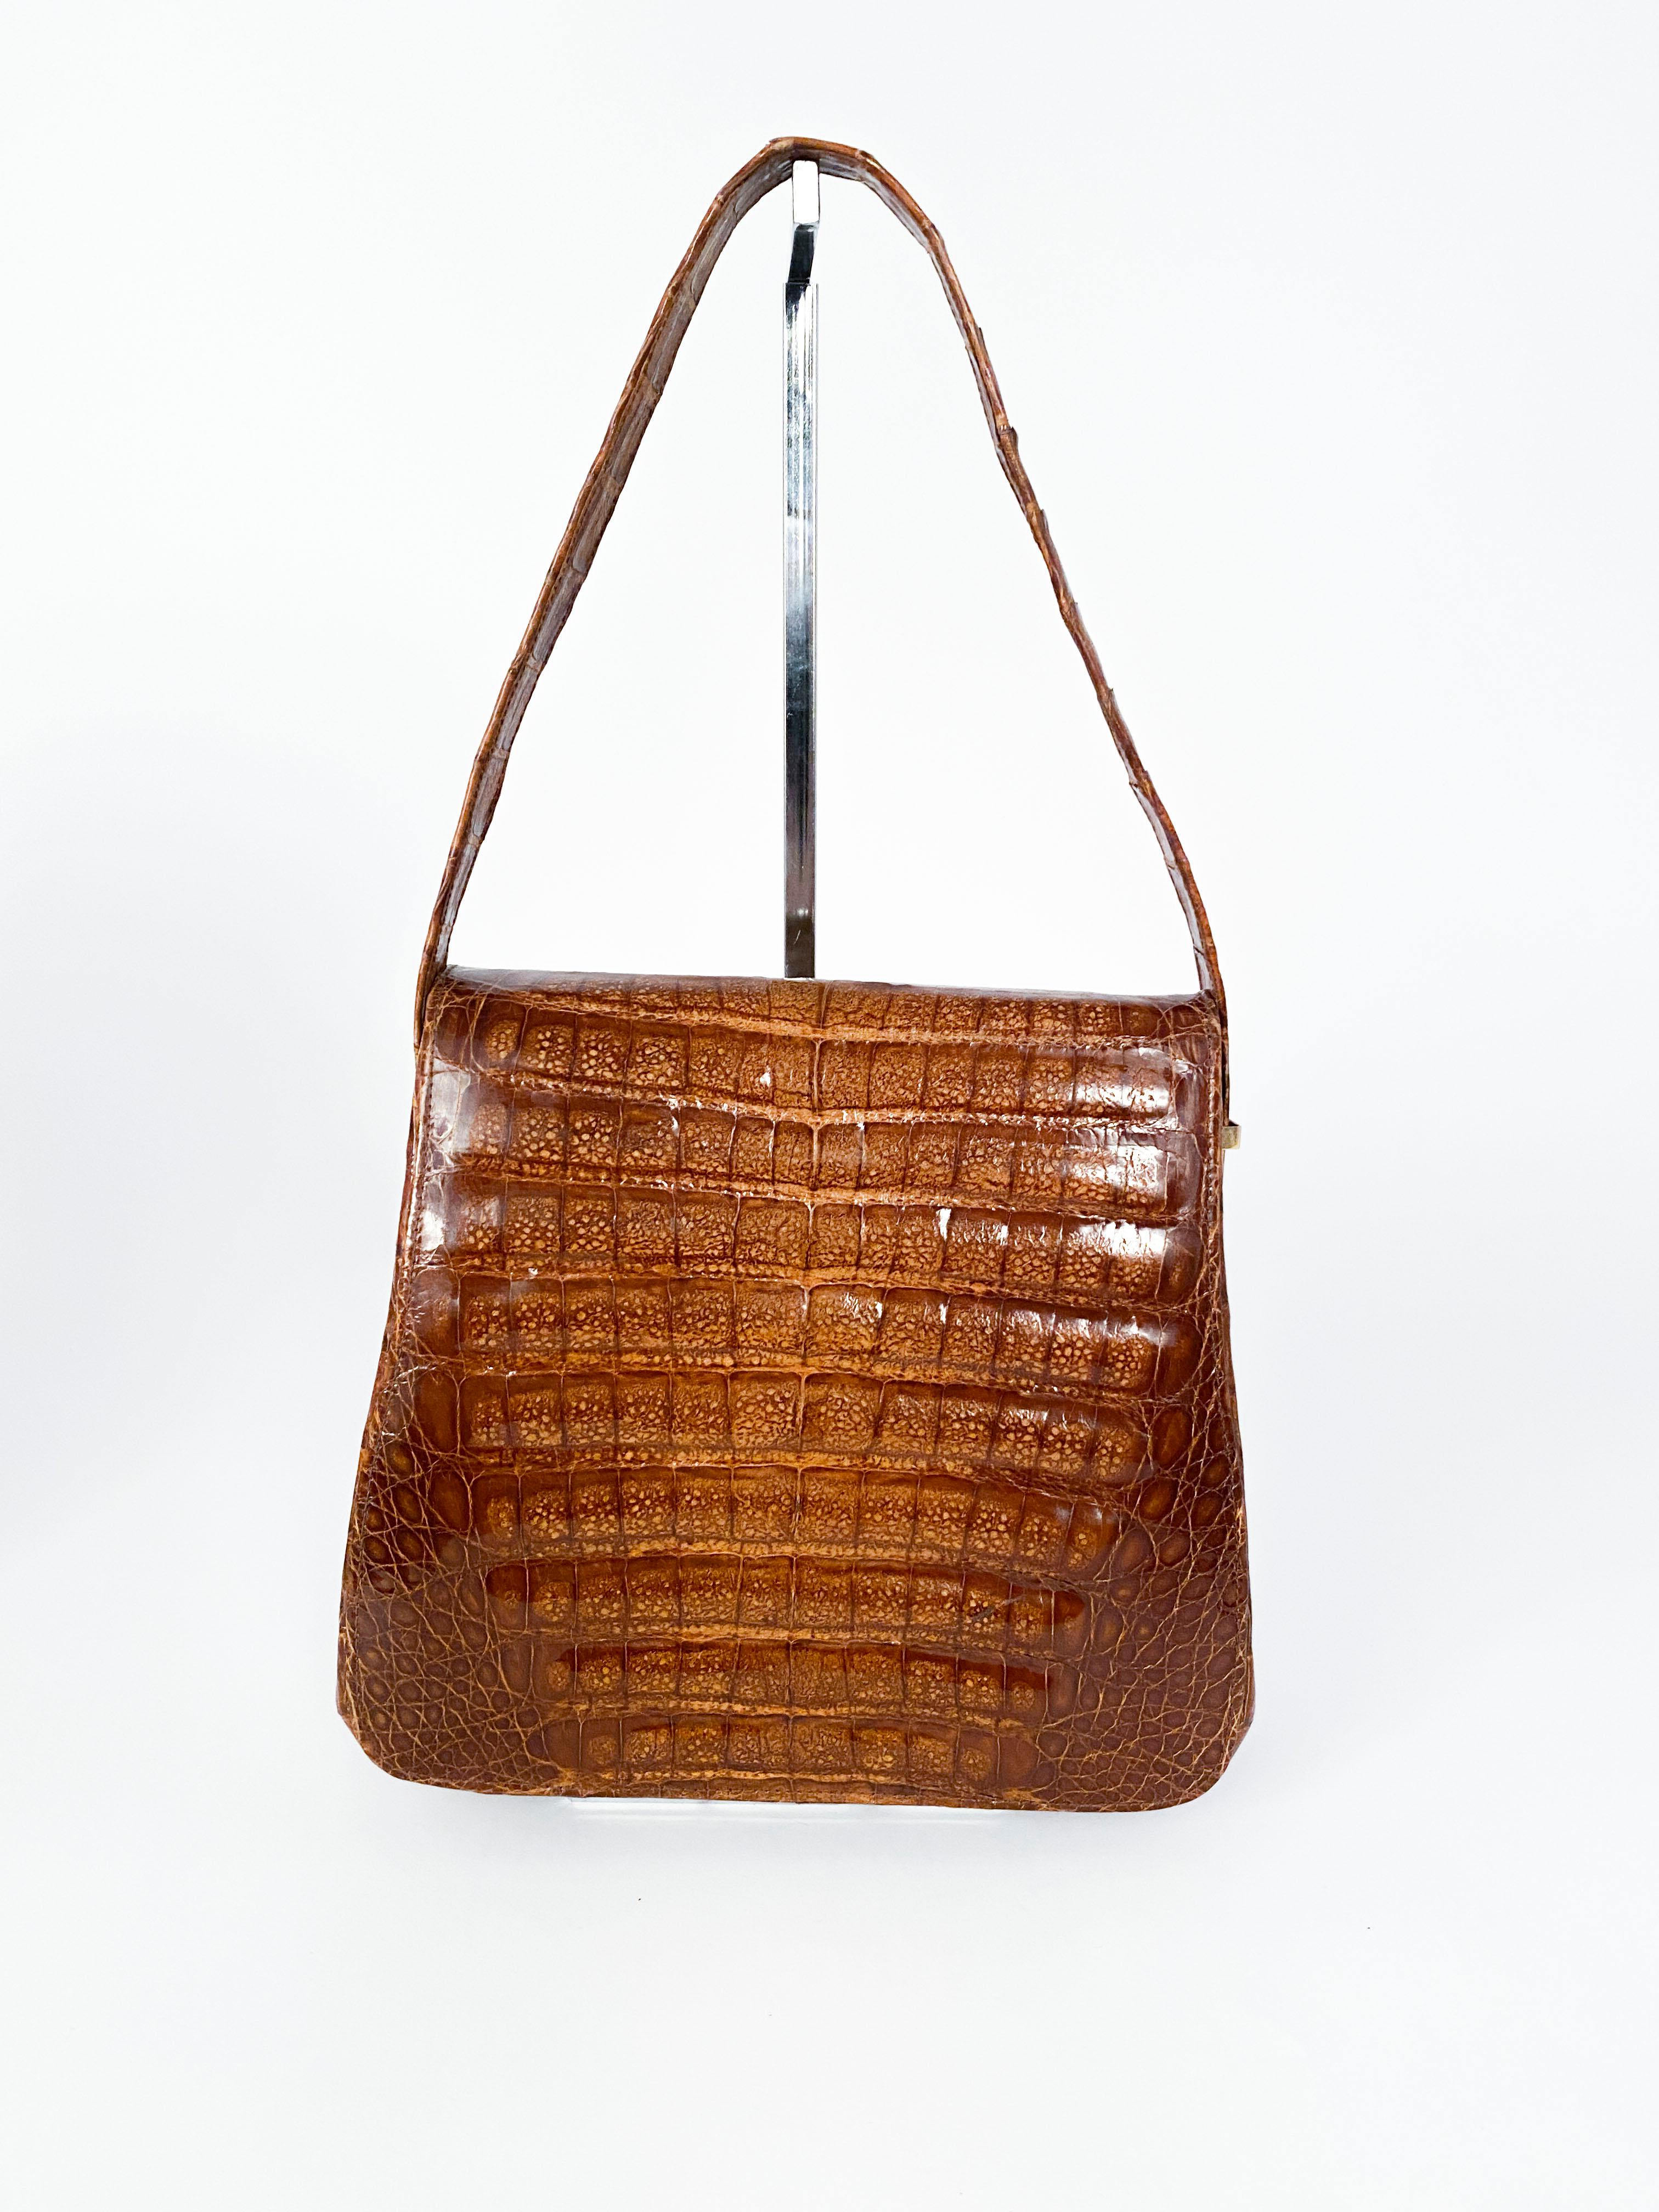 1980s light brown crocodile hand bag featuring a decorative and functional brass closure. The handle to this bag have fastenings that allows the handle to be extended about 3 inches on each side.